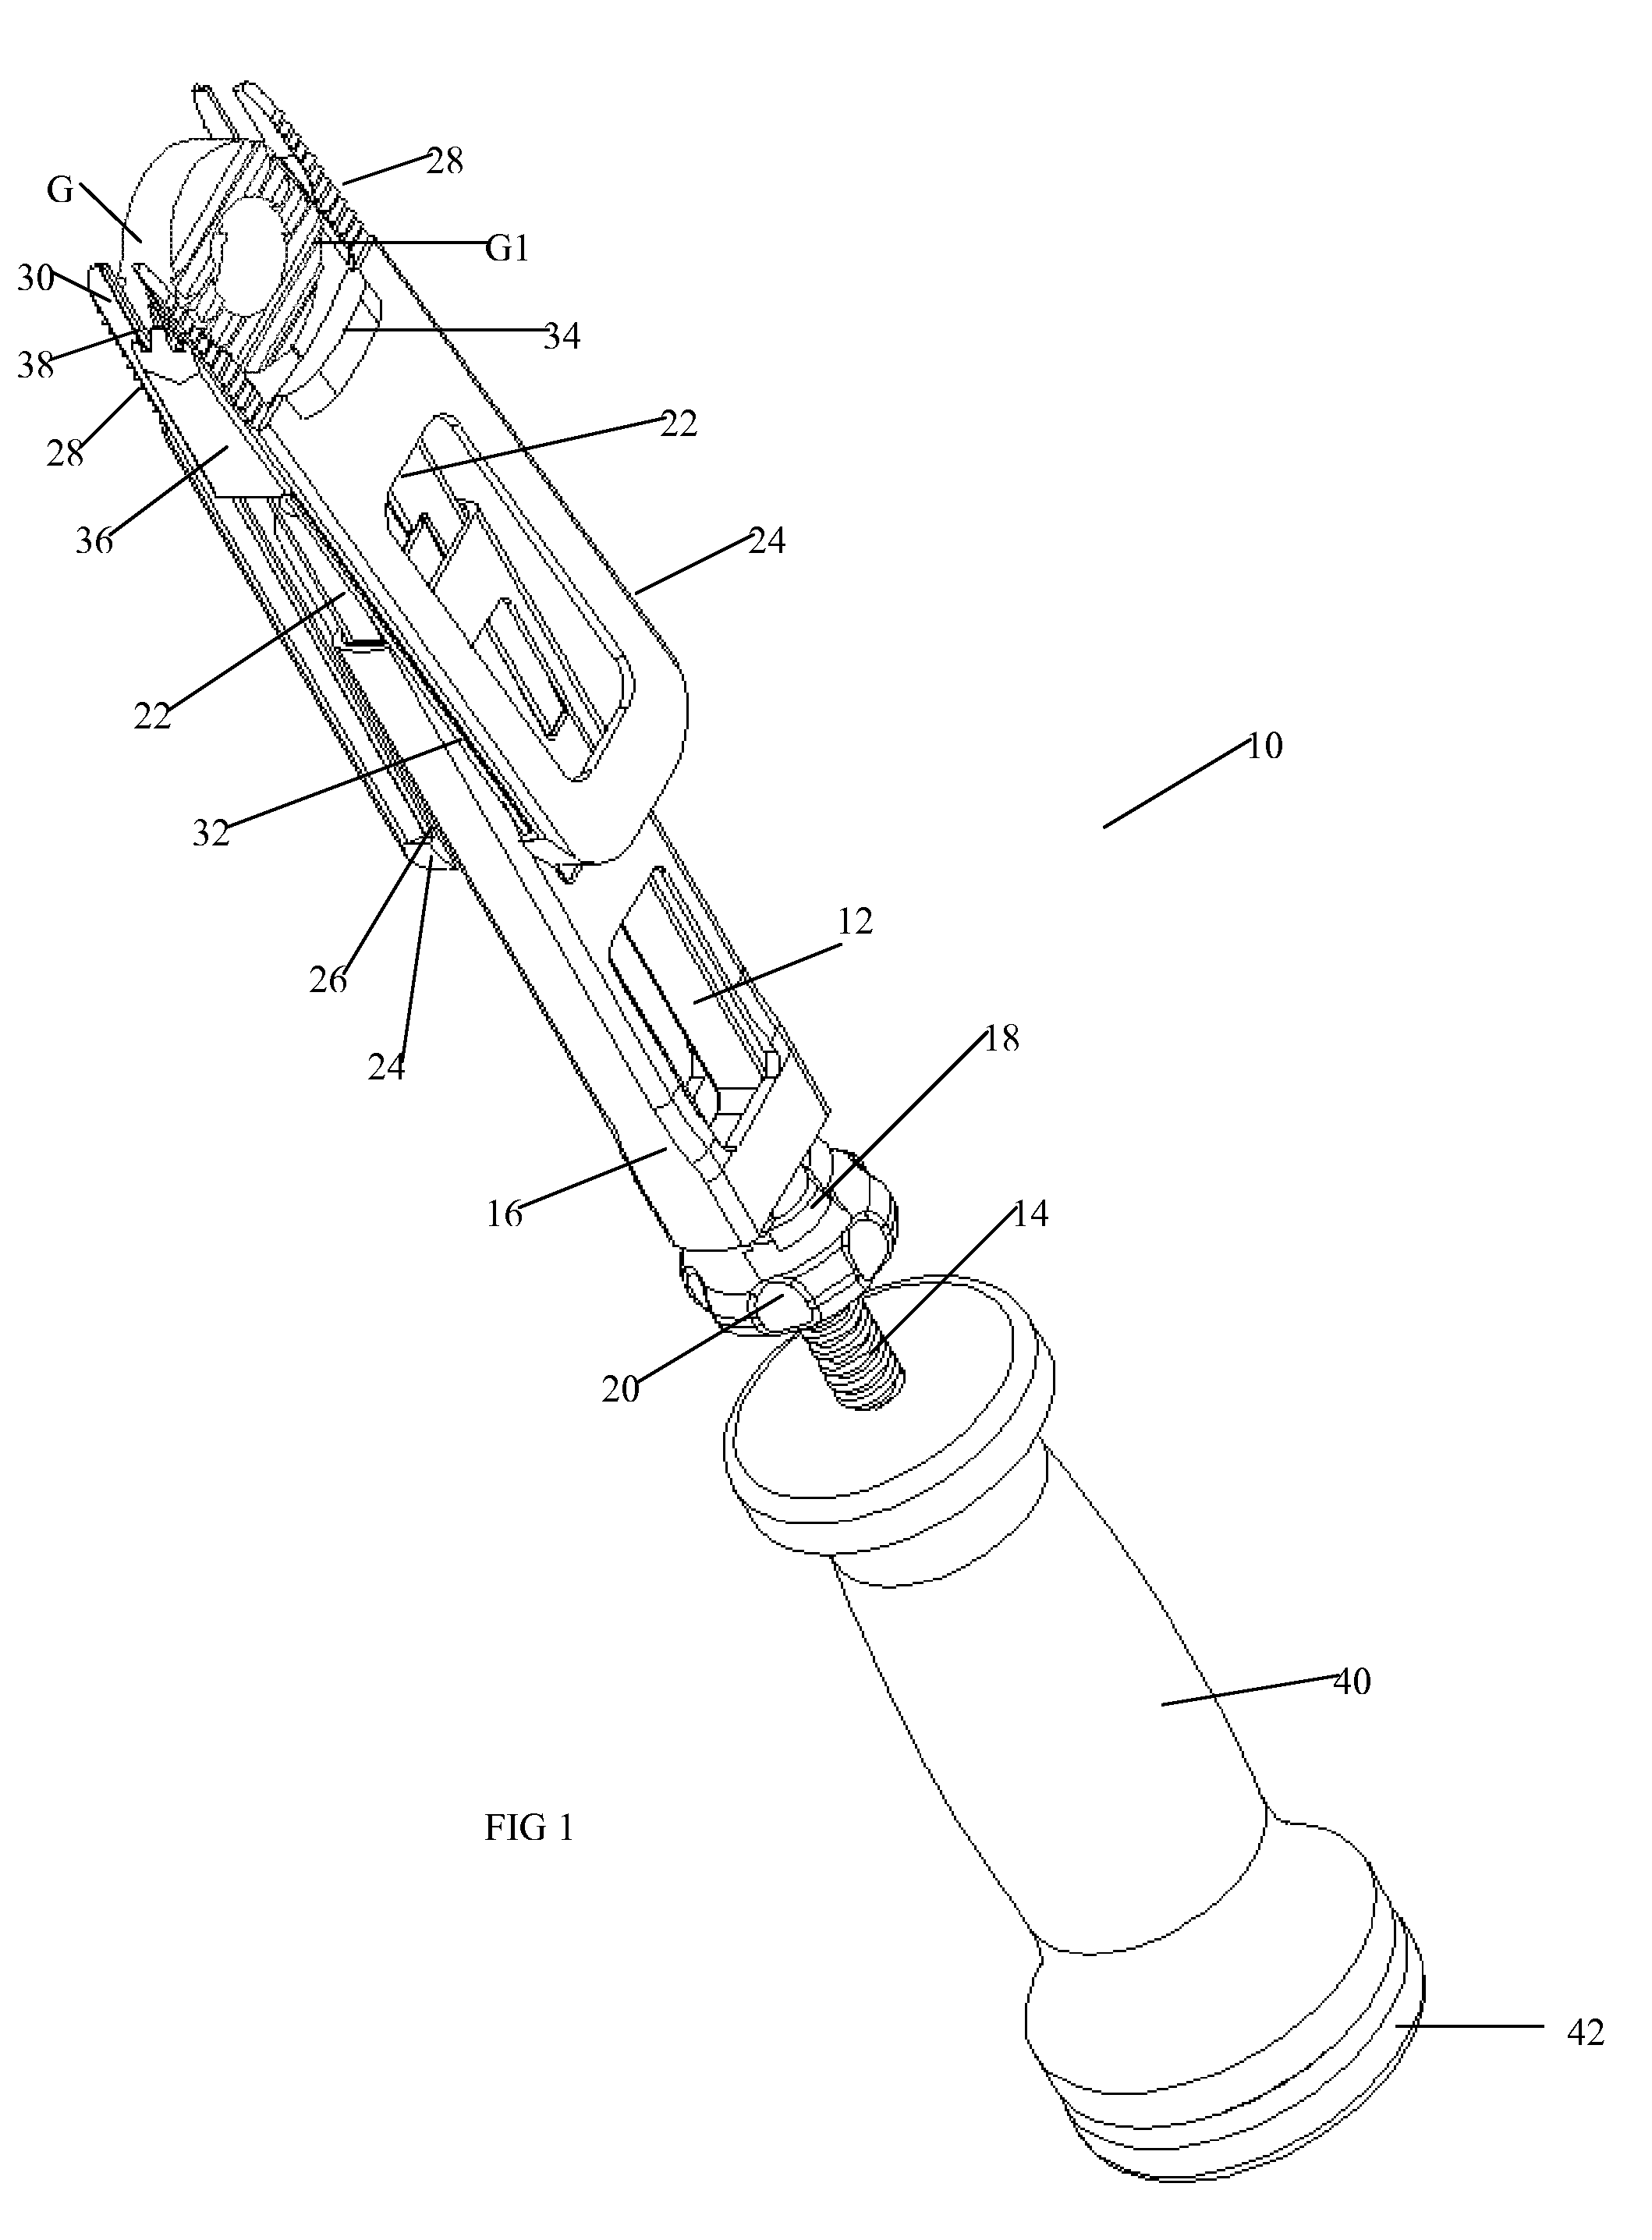 Apparatus and Methods for Inserting an Implant